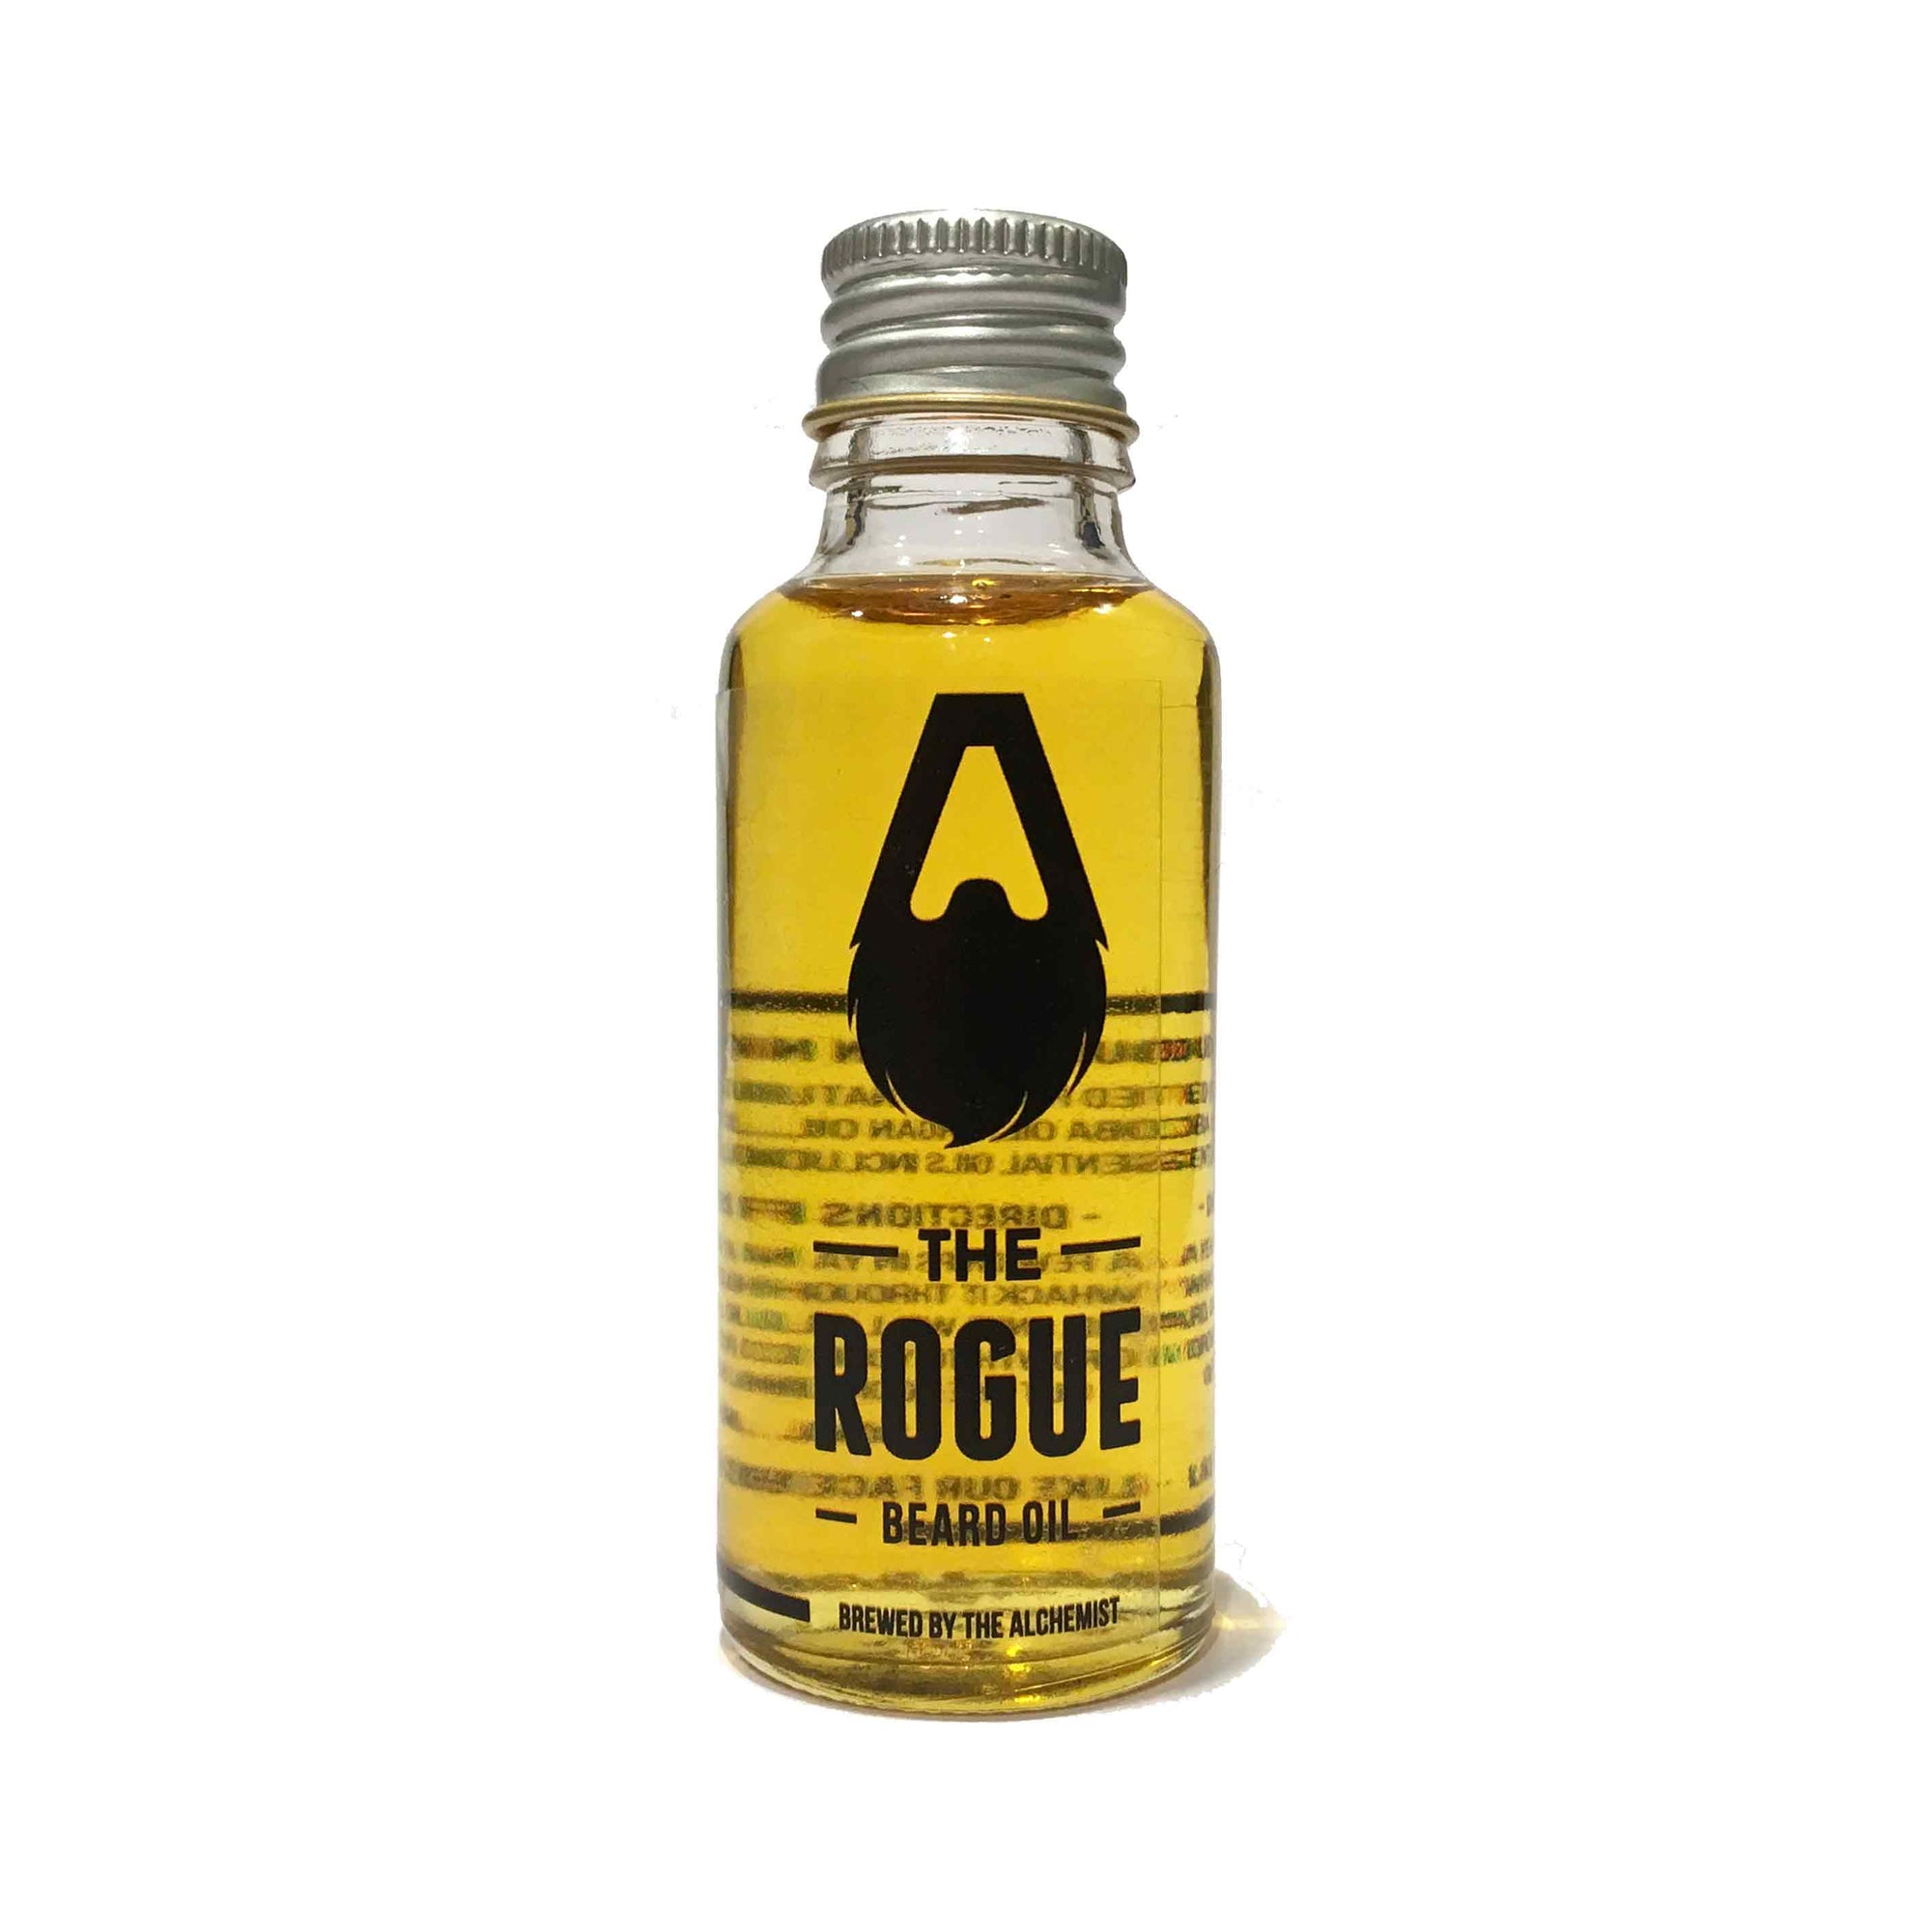 The Rogue all purpose oil by the alchemist_beard balm- bloke barbers dunedin - gifts for men